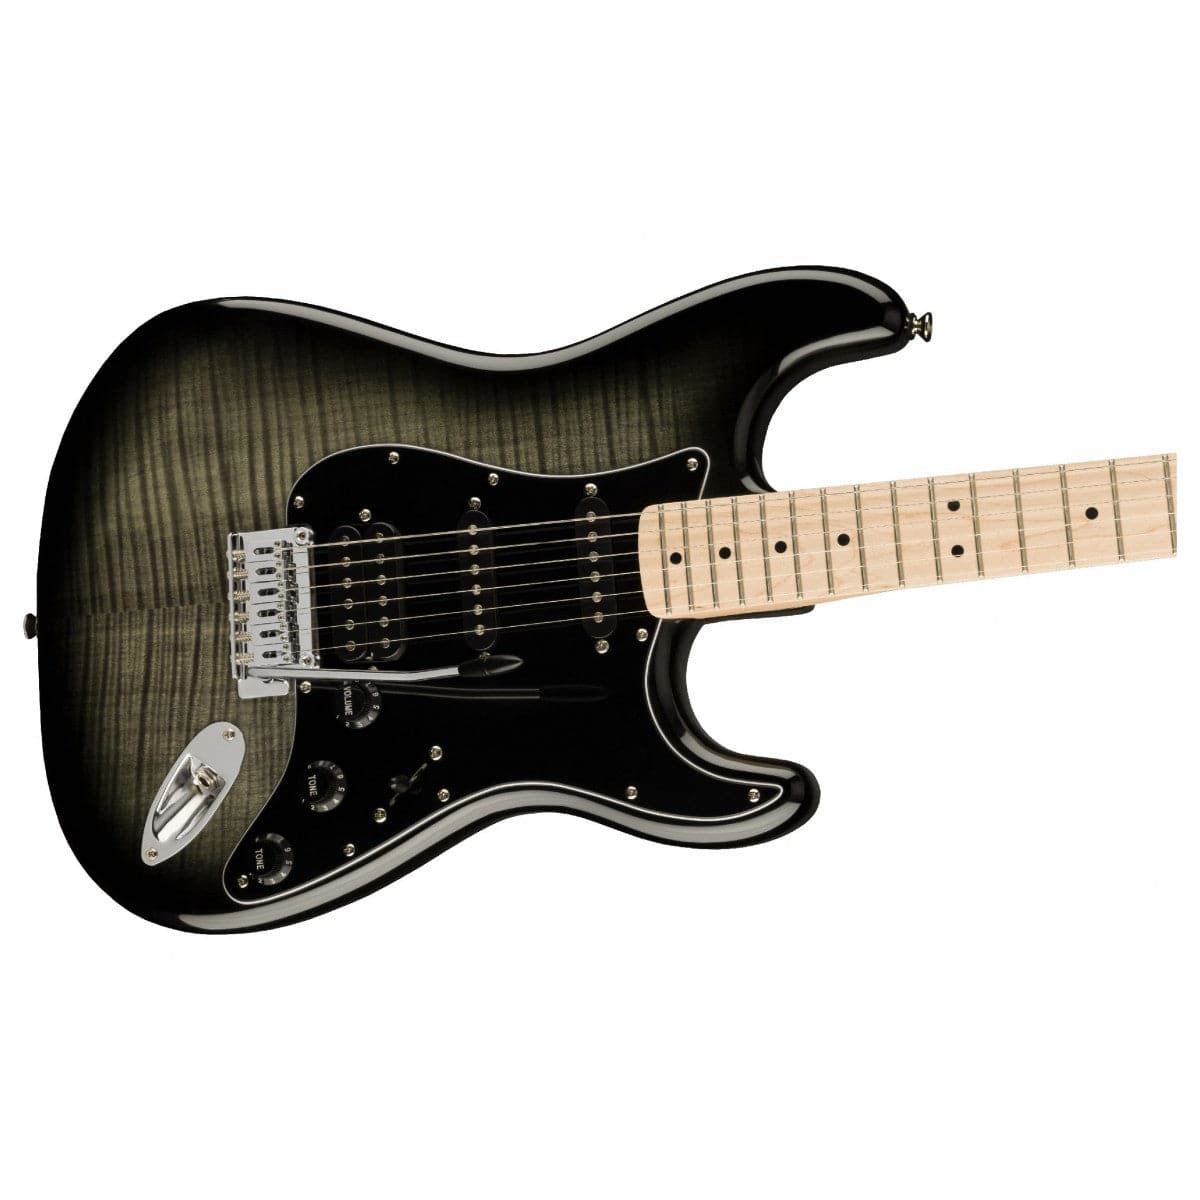 Squier Affinity Stratocaster HSS - Flame Maple Top - Black Burst